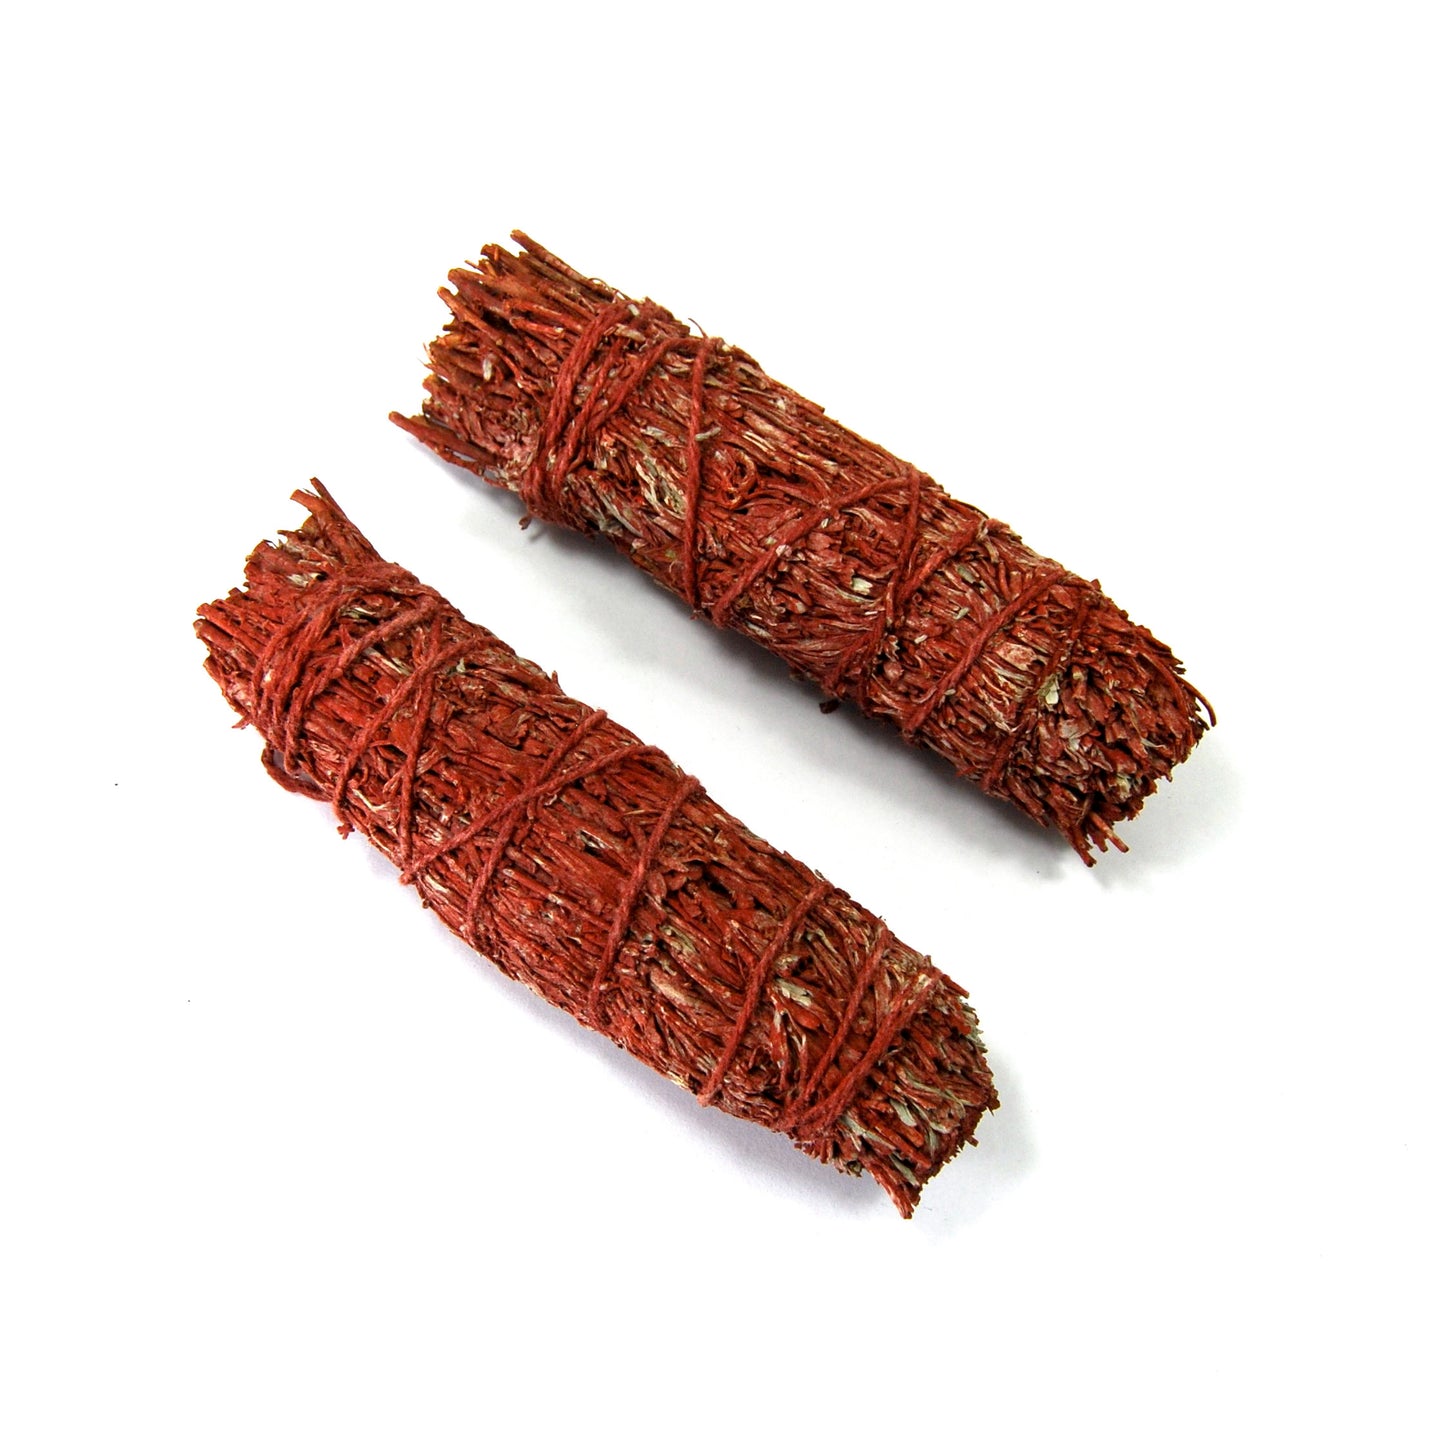 ONE Dragons Blood Resin and Mountain Sage Smudge Stick 4in